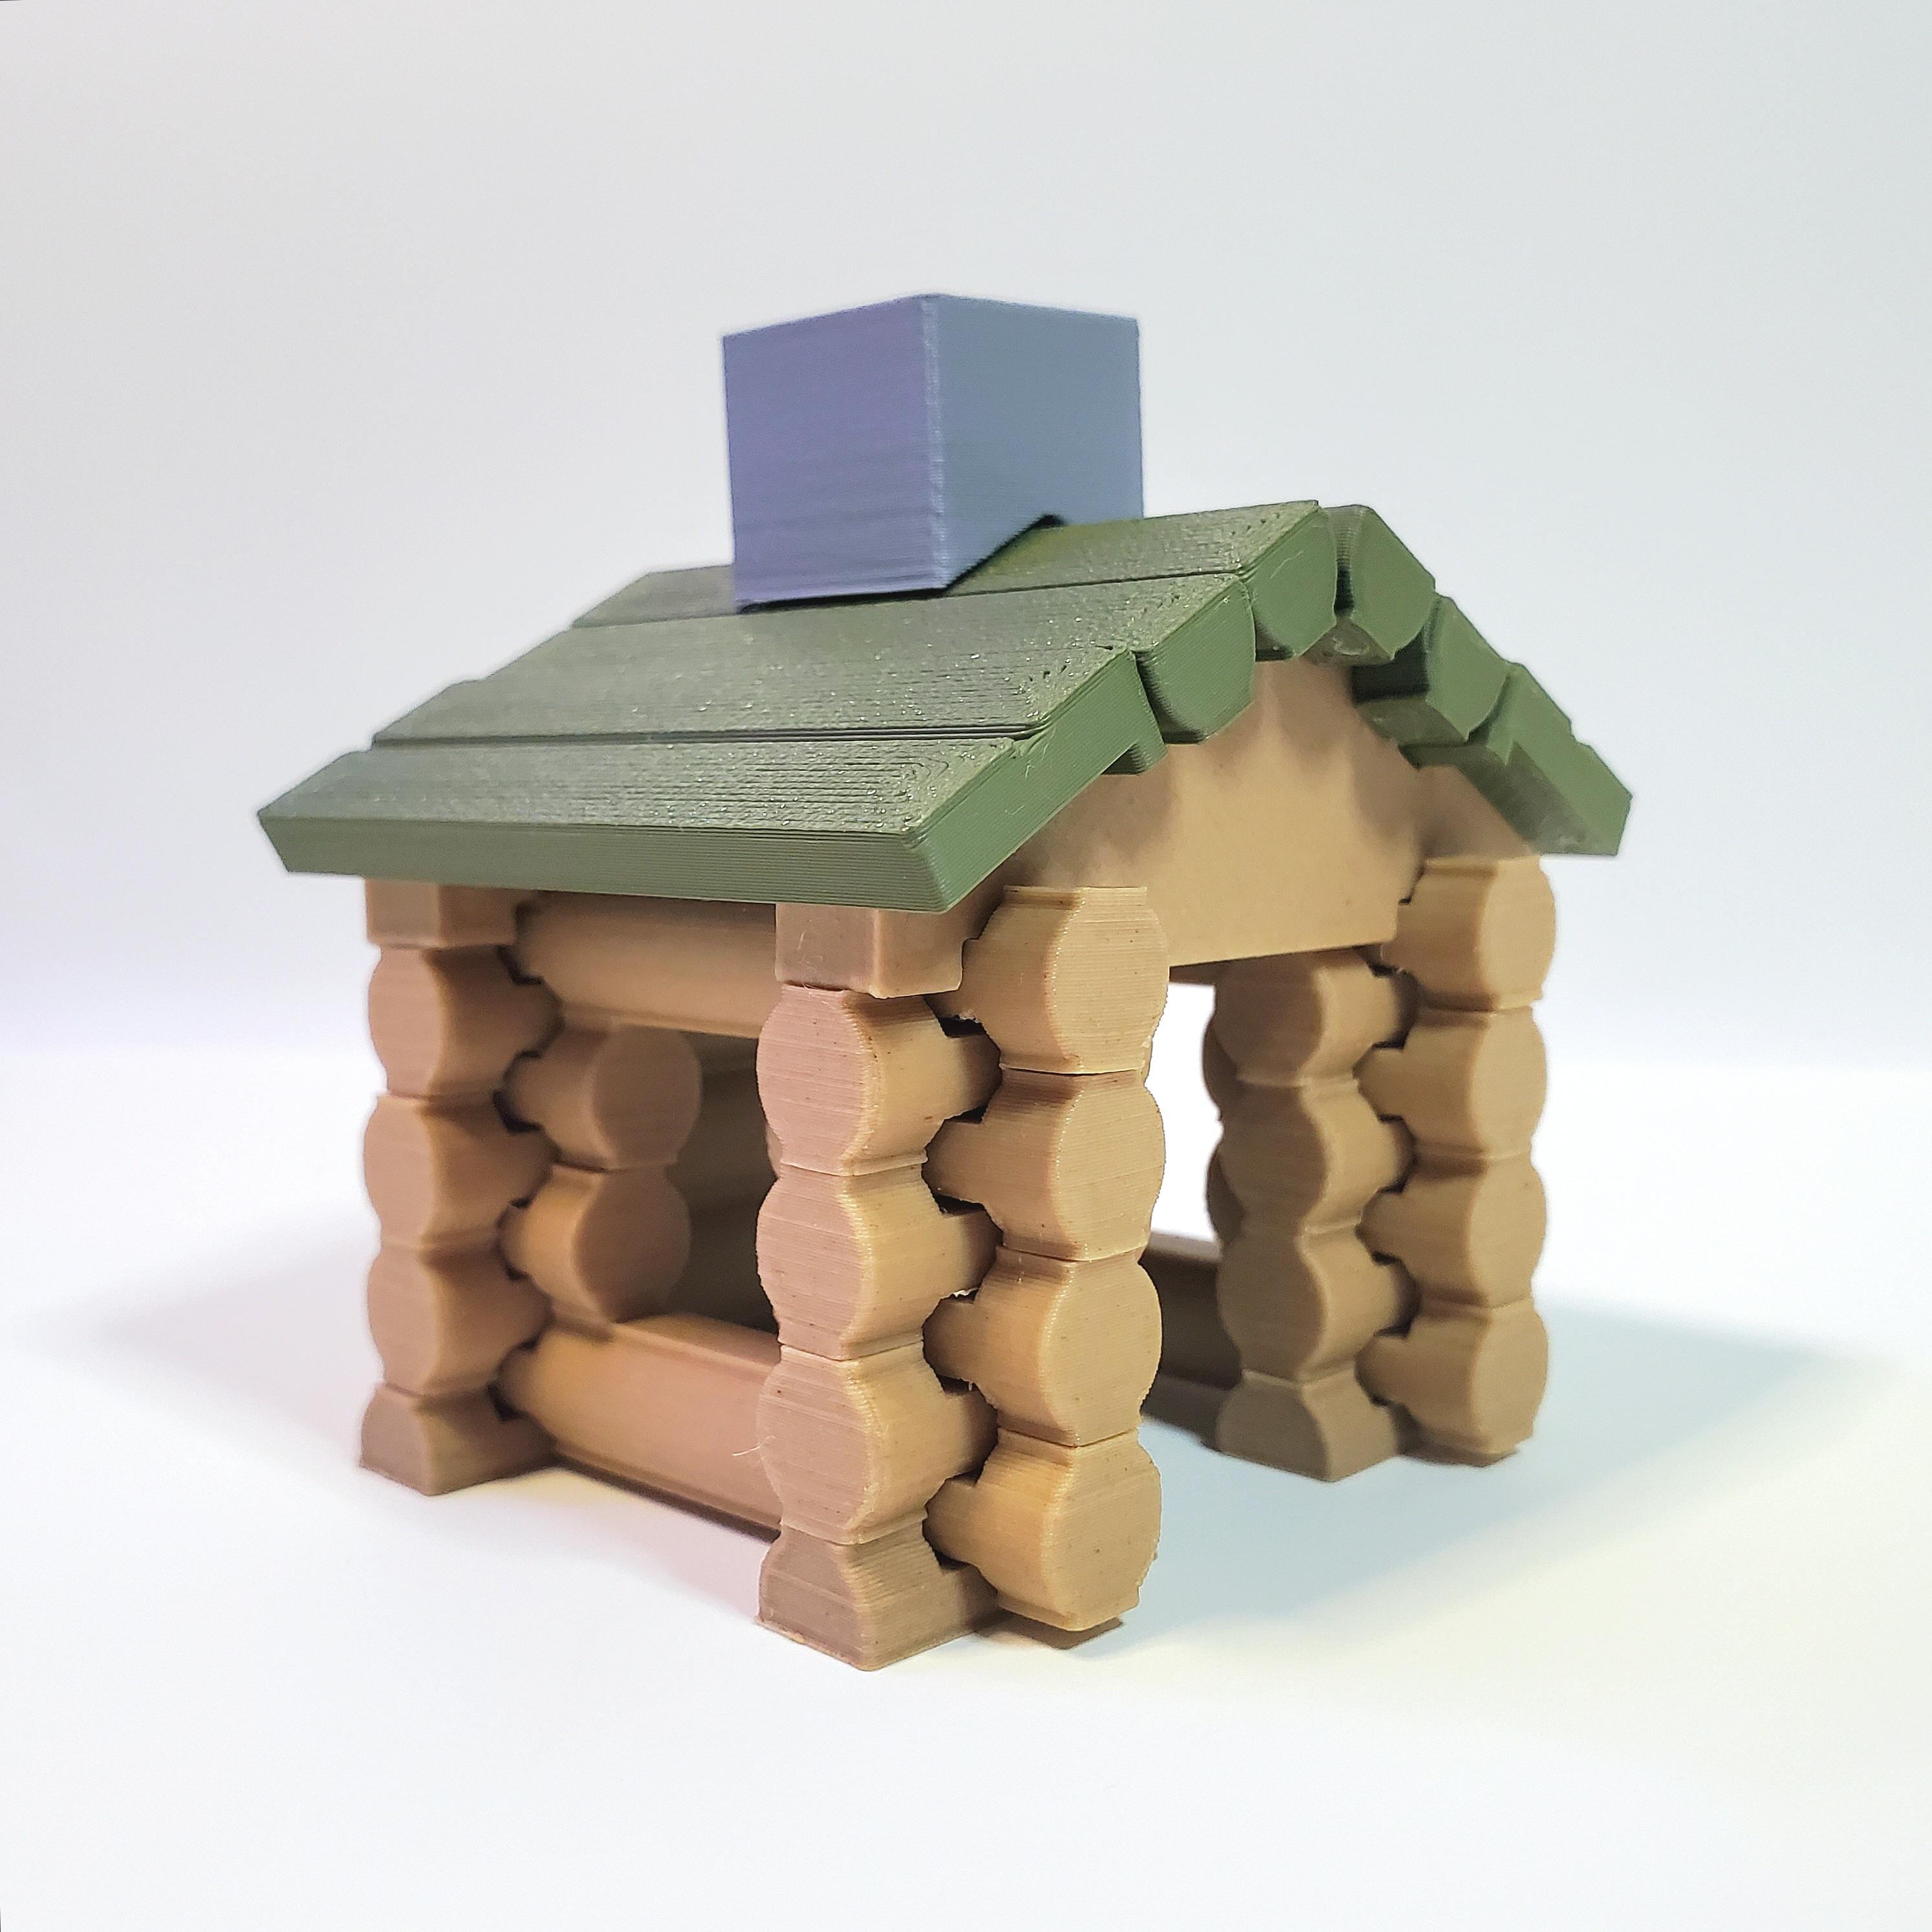 Miniature Desktop Log Cabin Building Kit *ALL PARTS INCLUDED* Classic Novelty Toy 3d model